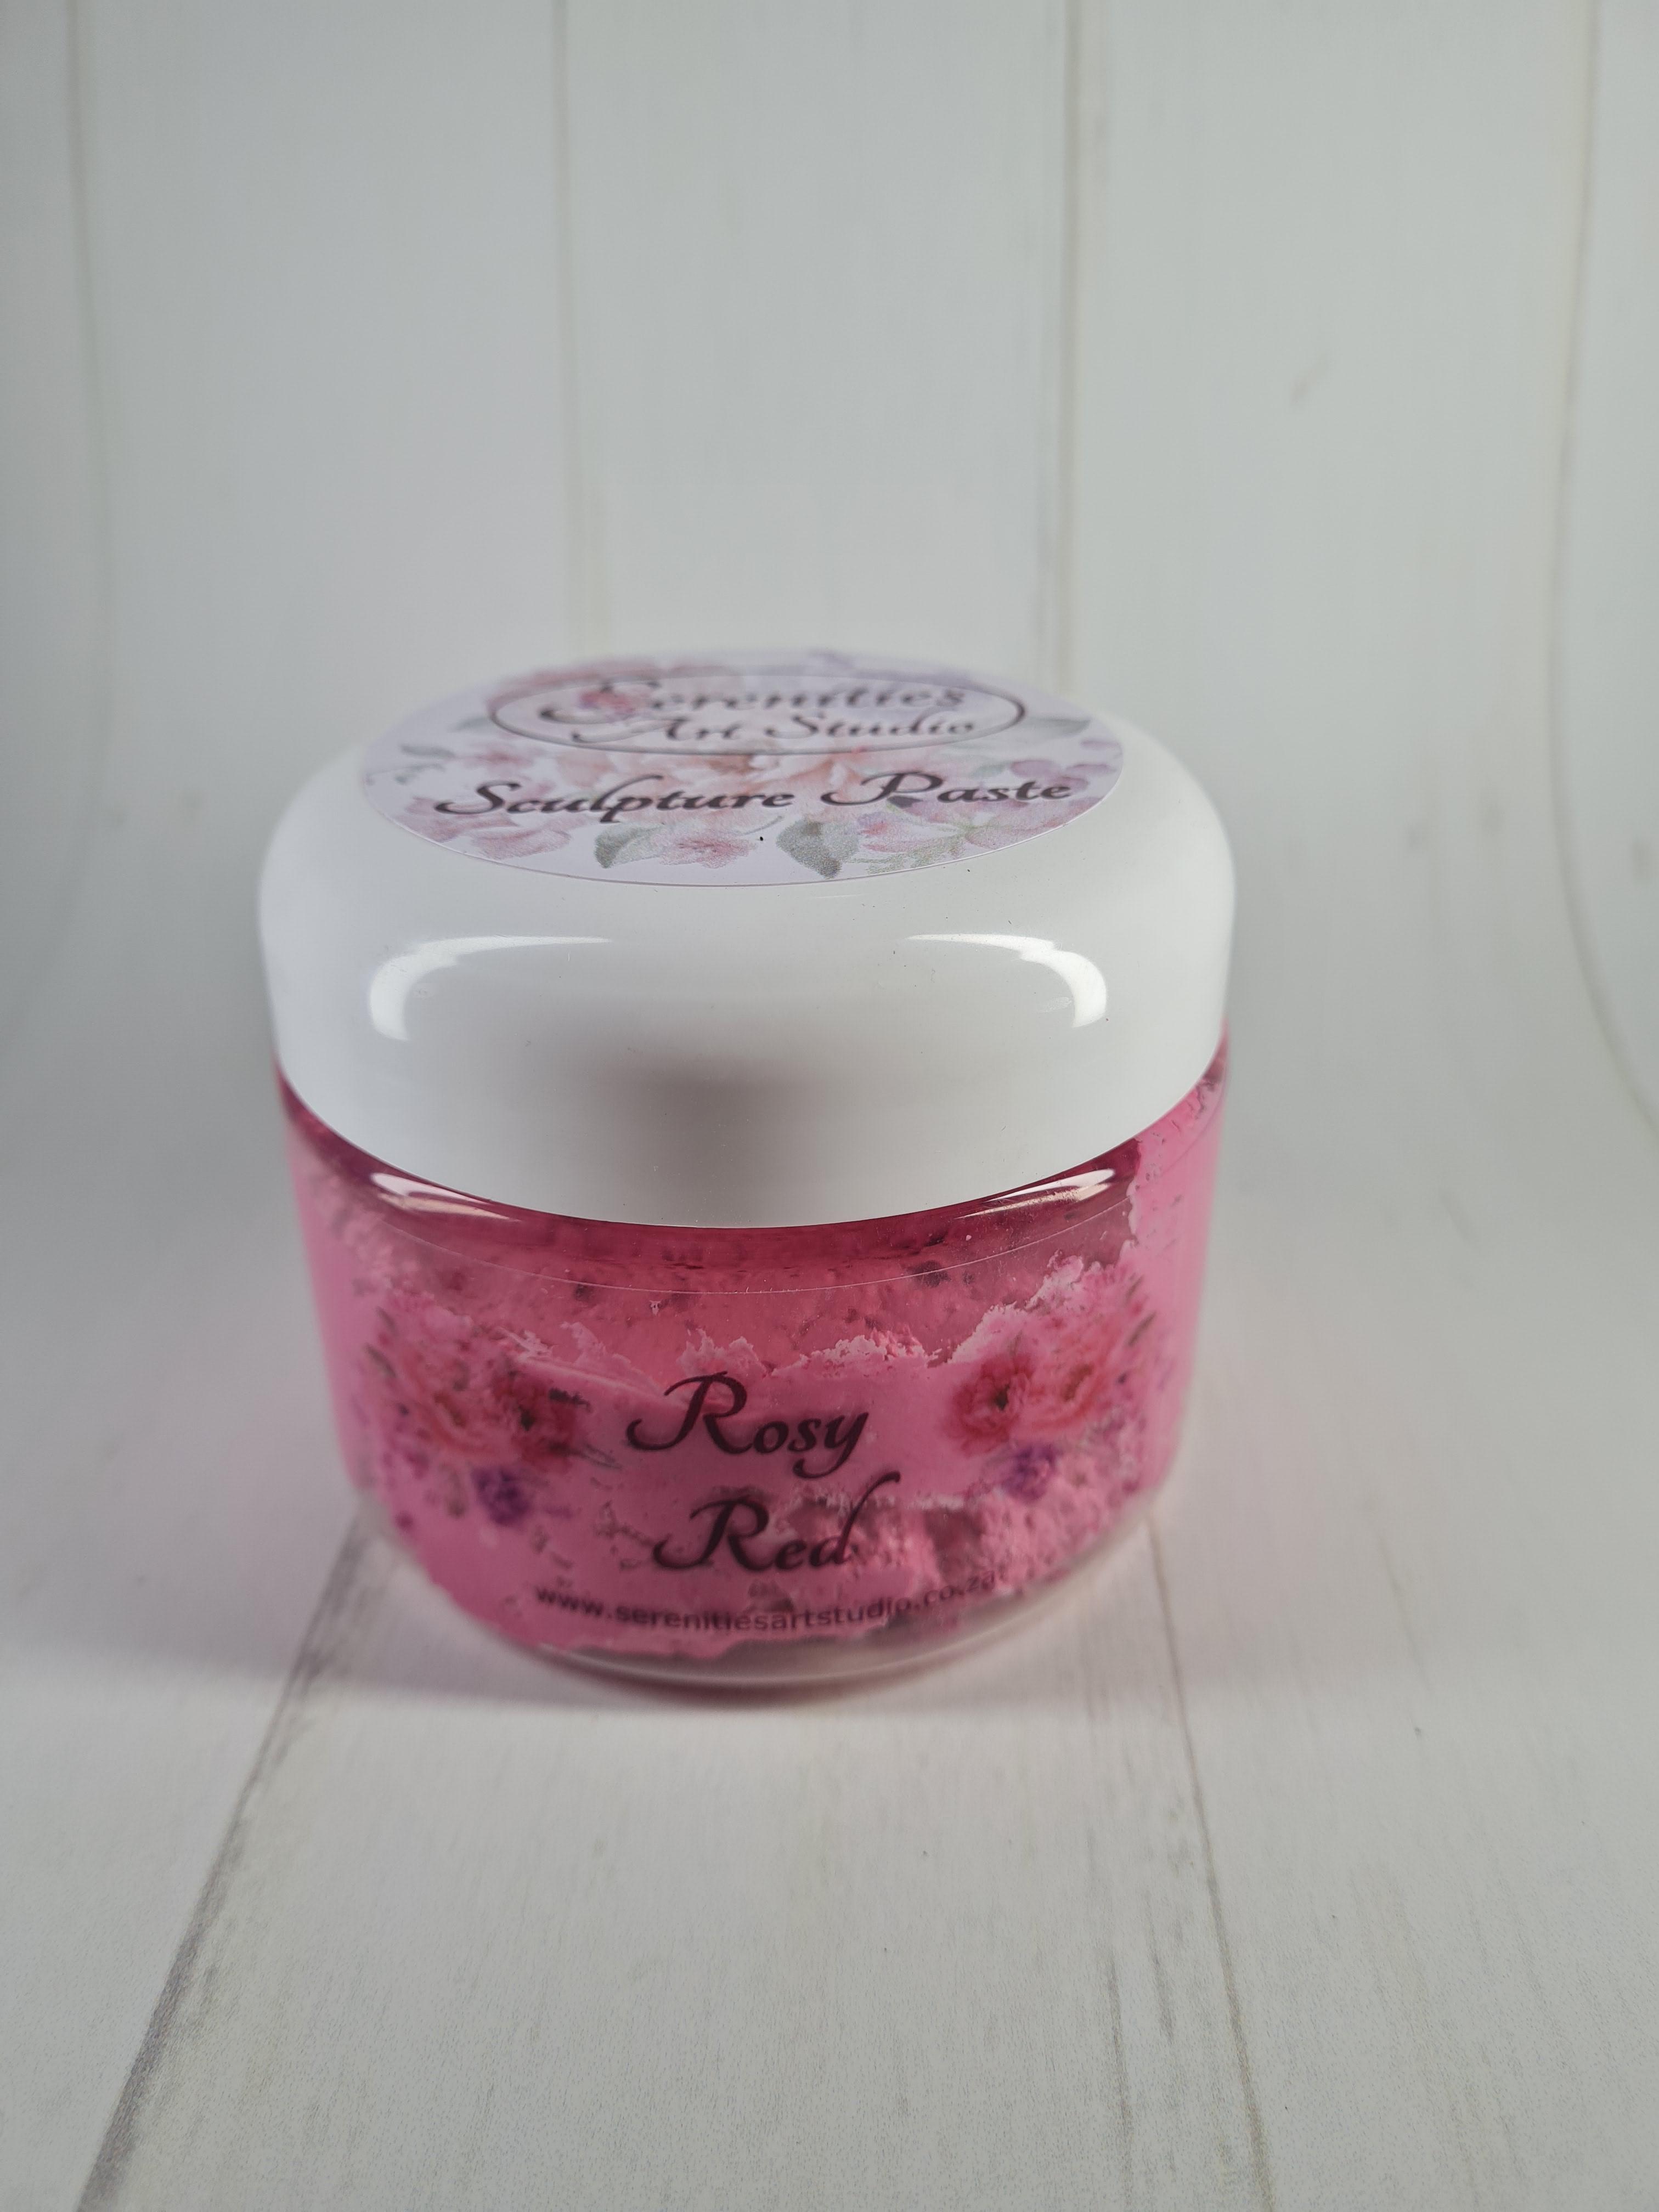 Rosy Red Sculpture Paste